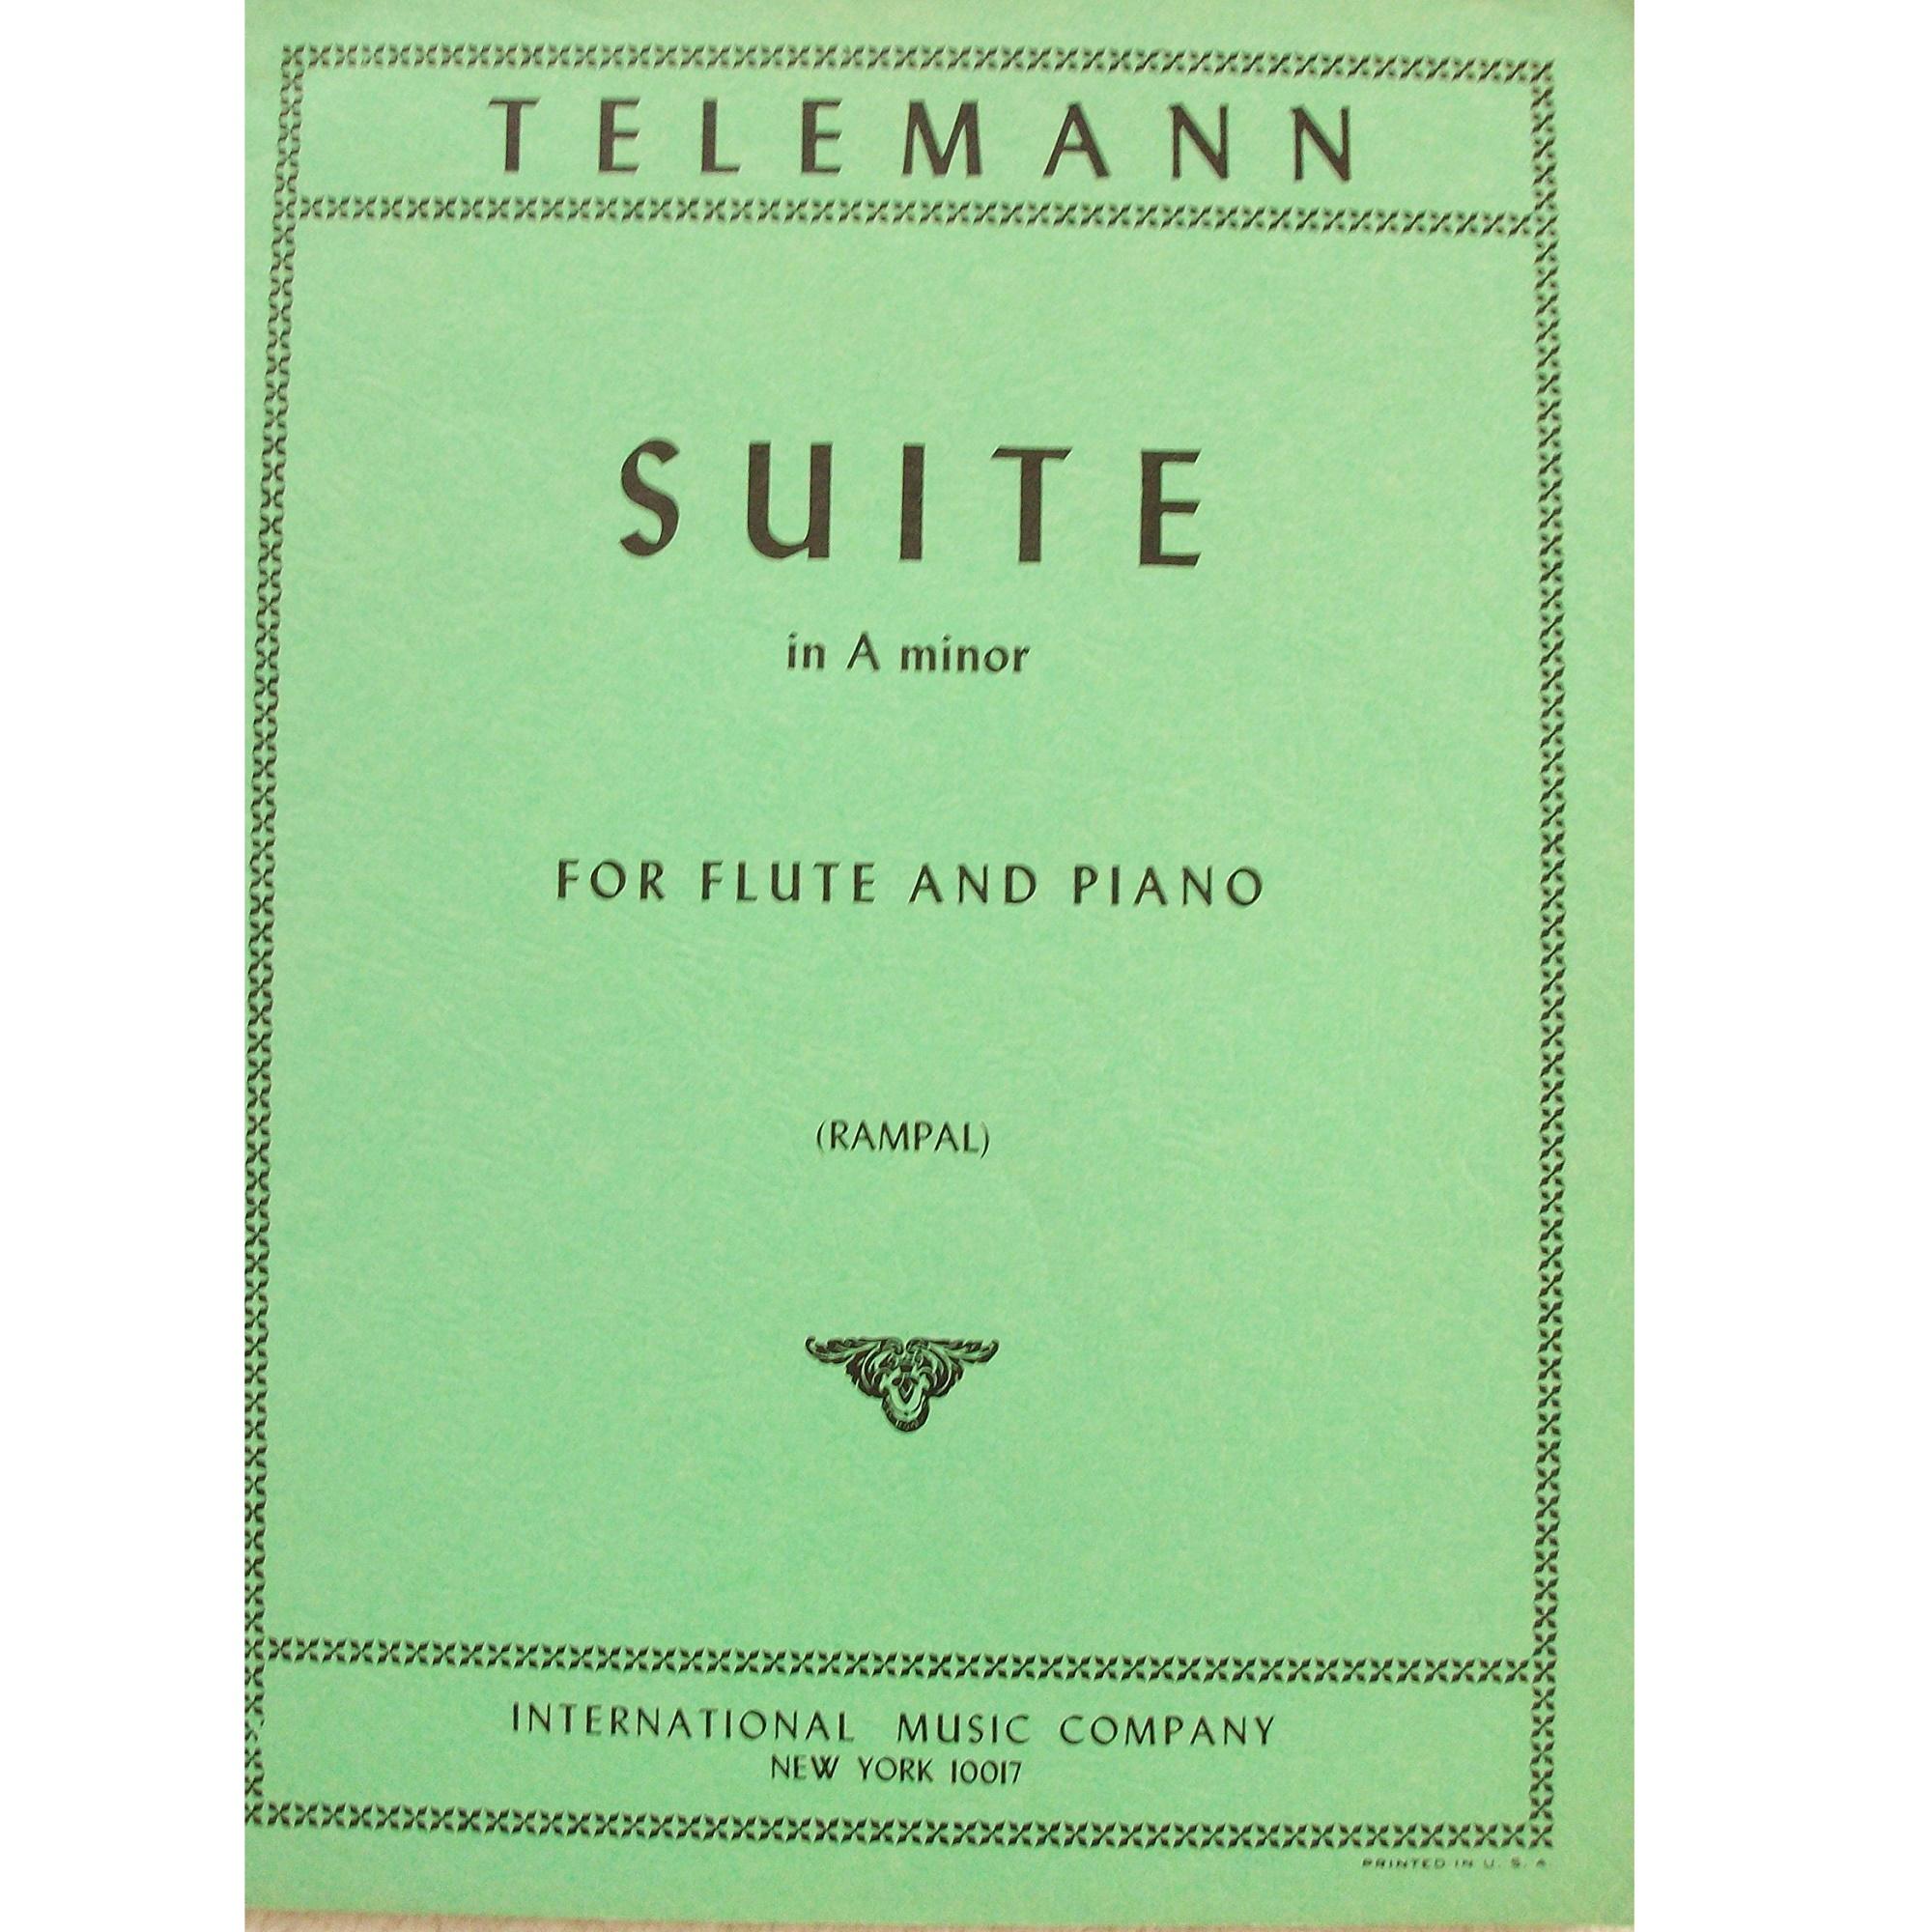 Telemann Suite in A minor for Flute and Piano (Rampal) - International Music Company